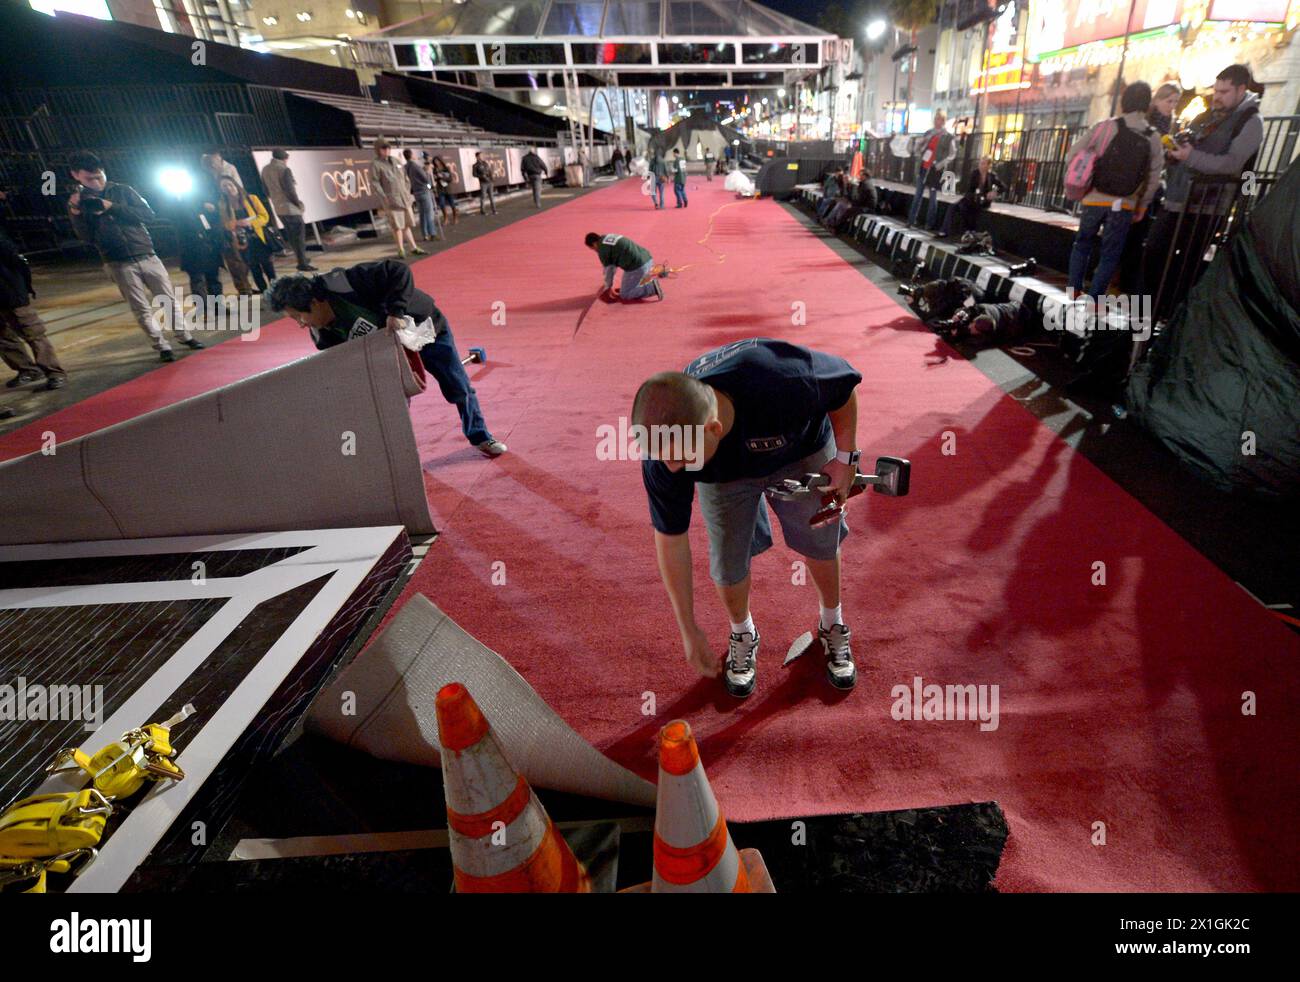 Los Angeles - Preparation works for the 85th Academy Awards ceremony. The prestigious Oscars award ceremony which honors the best in cinema takes place on 24 February 2013. PICTURE: 21st February 2013 -   Workers are rolling out the red carpet in front of the Dolby Theatre in Hollywood - 20130221 PD0655 - Rechteinfo: Rights Managed (RM) Stock Photo